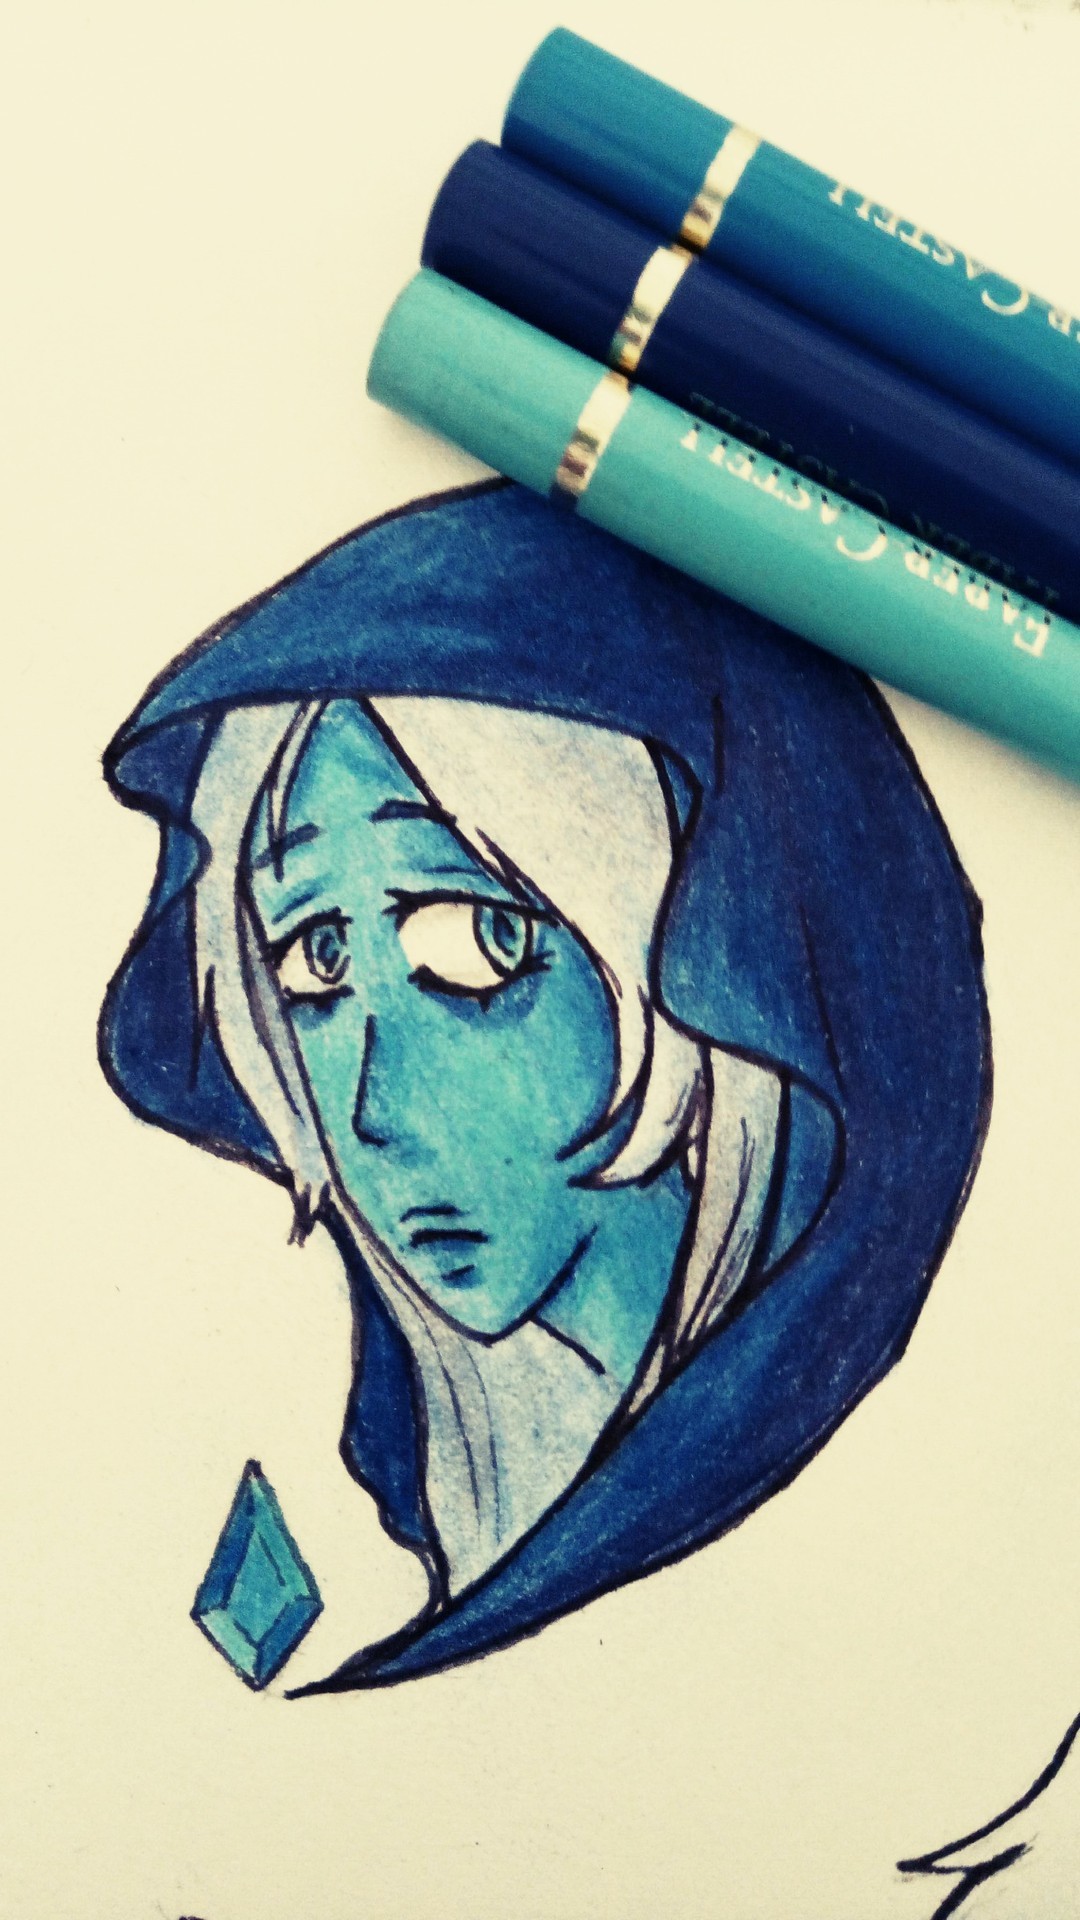 I gave Blue Diqmond some color! I know it is a little messy but I tried! ^^°